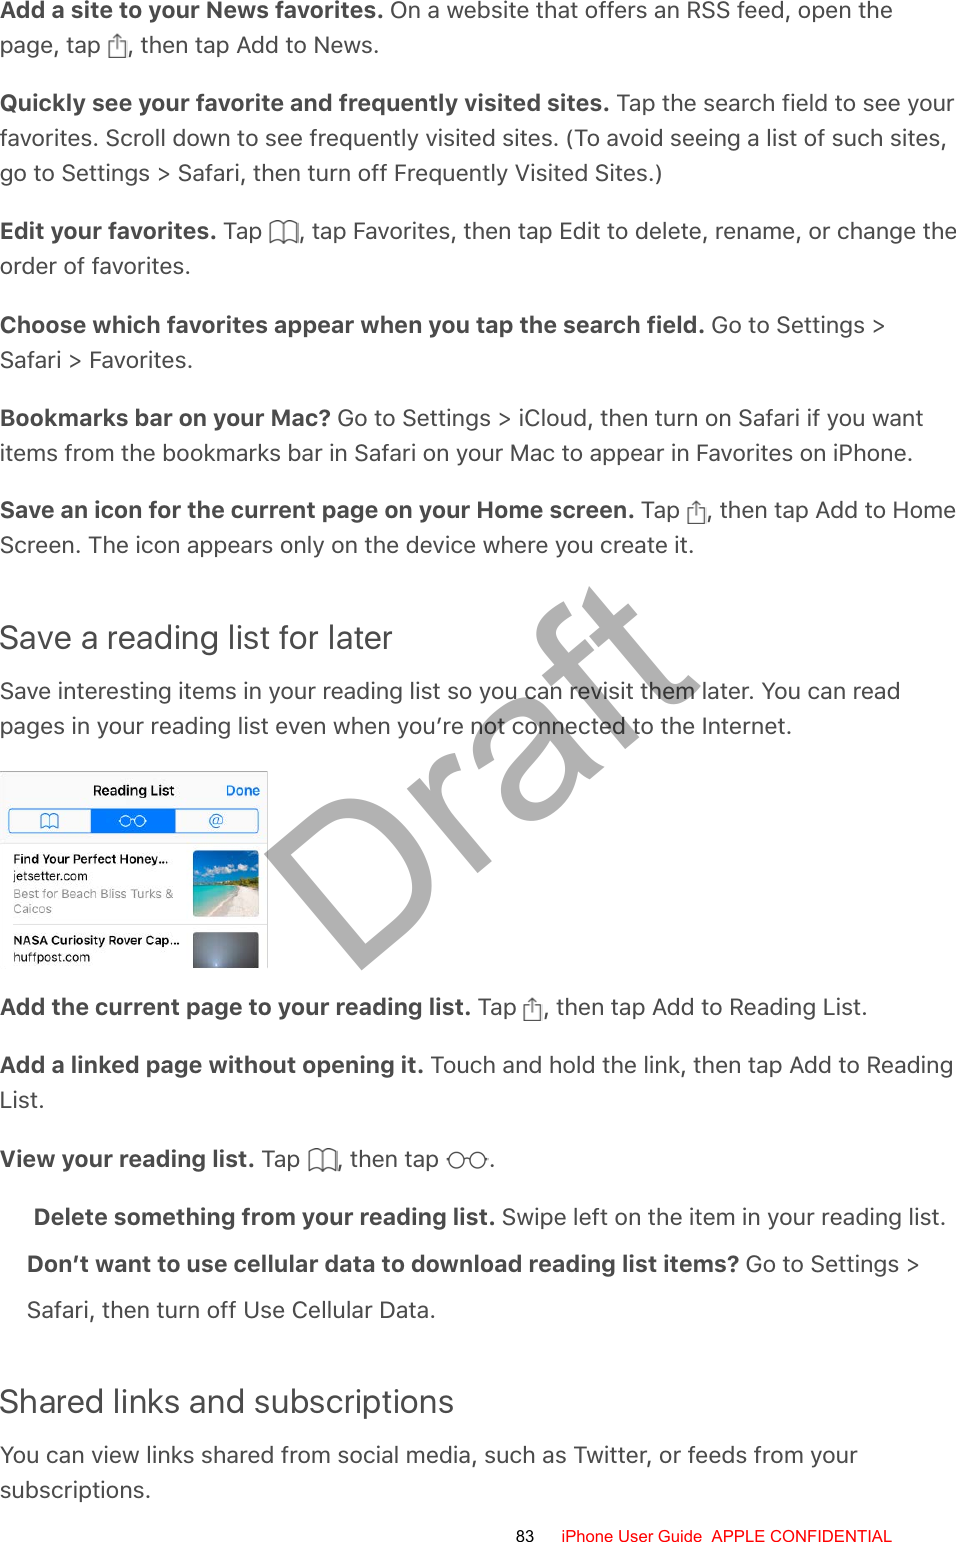 Add a site to your News favorites. On a website that offers an RSS feed, open thepage, tap  , then tap Add to News.Quickly see your favorite and frequently visited sites. Tap the search field to see yourfavorites. Scroll down to see frequently visited sites. (To avoid seeing a list of such sites,go to Settings &gt; Safari, then turn off Frequently Visited Sites.)Edit your favorites. Tap  , tap Favorites, then tap Edit to delete, rename, or change theorder of favorites.Choose which favorites appear when you tap the search field. Go to Settings &gt;Safari &gt; Favorites.Bookmarks bar on your Mac? Go to Settings &gt; iCloud, then turn on Safari if you wantitems from the bookmarks bar in Safari on your Mac to appear in Favorites on iPhone.Save an icon for the current page on your Home screen. Tap  , then tap Add to HomeScreen. The icon appears only on the device where you create it.Save a reading list for laterSave interesting items in your reading list so you can revisit them later. You can readpages in your reading list even when you’re not connected to the Internet.Add the current page to your reading list. Tap  , then tap Add to Reading List.Add a linked page without opening it. Touch and hold the link, then tap Add to ReadingList.View your reading list. Tap  , then tap  .Delete something from your reading list. Swipe left on the item in your reading list. Don’t want to use cellular data to download reading list items? Go to Settings &gt; Safari, then turn off Use Cellular Data.Shared links and subscriptionsYou can view links shared from social media, such as Twitter, or feeds from yoursubscriptions.83 iPhone User Guide  APPLE CONFIDENTIALDraft